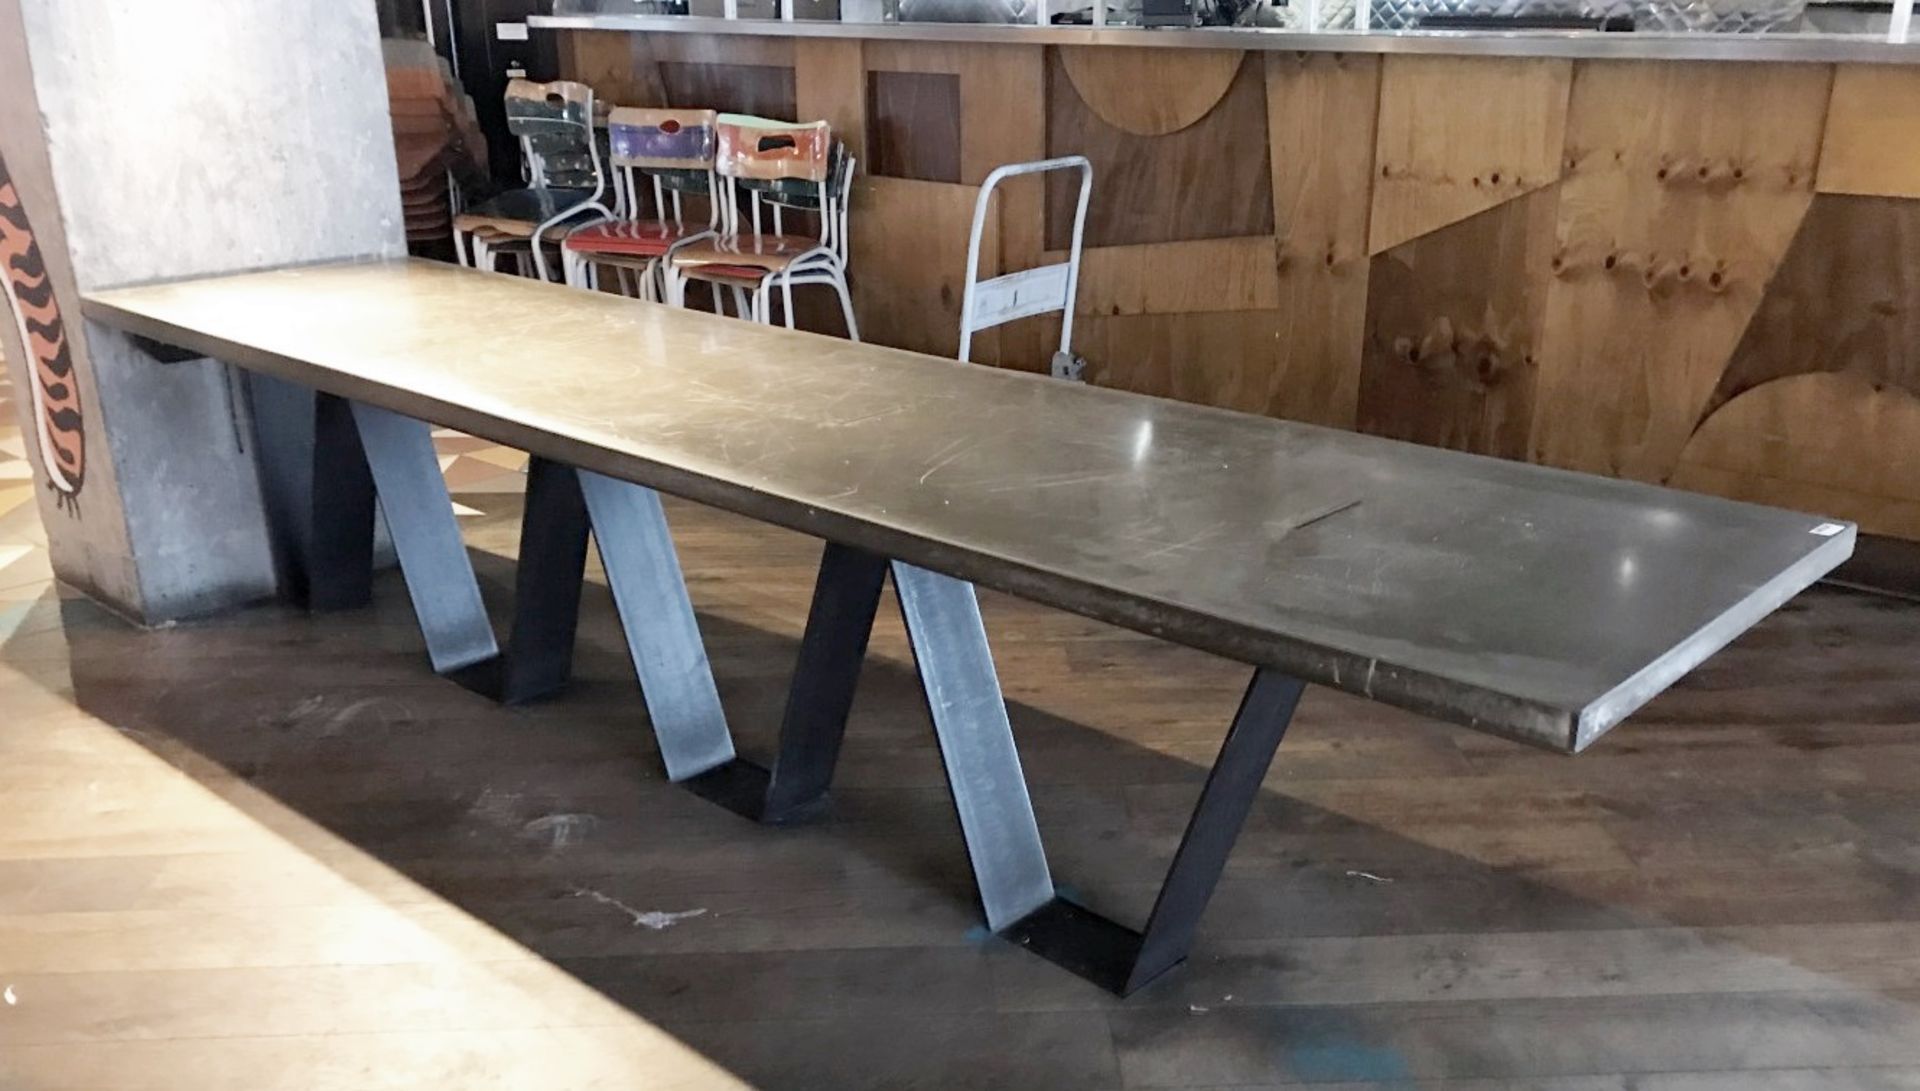 1 x Bespoke Industrial Style 10ft Long Concrete Topped Banquetting Restaurant Table - Bild 6 aus 9